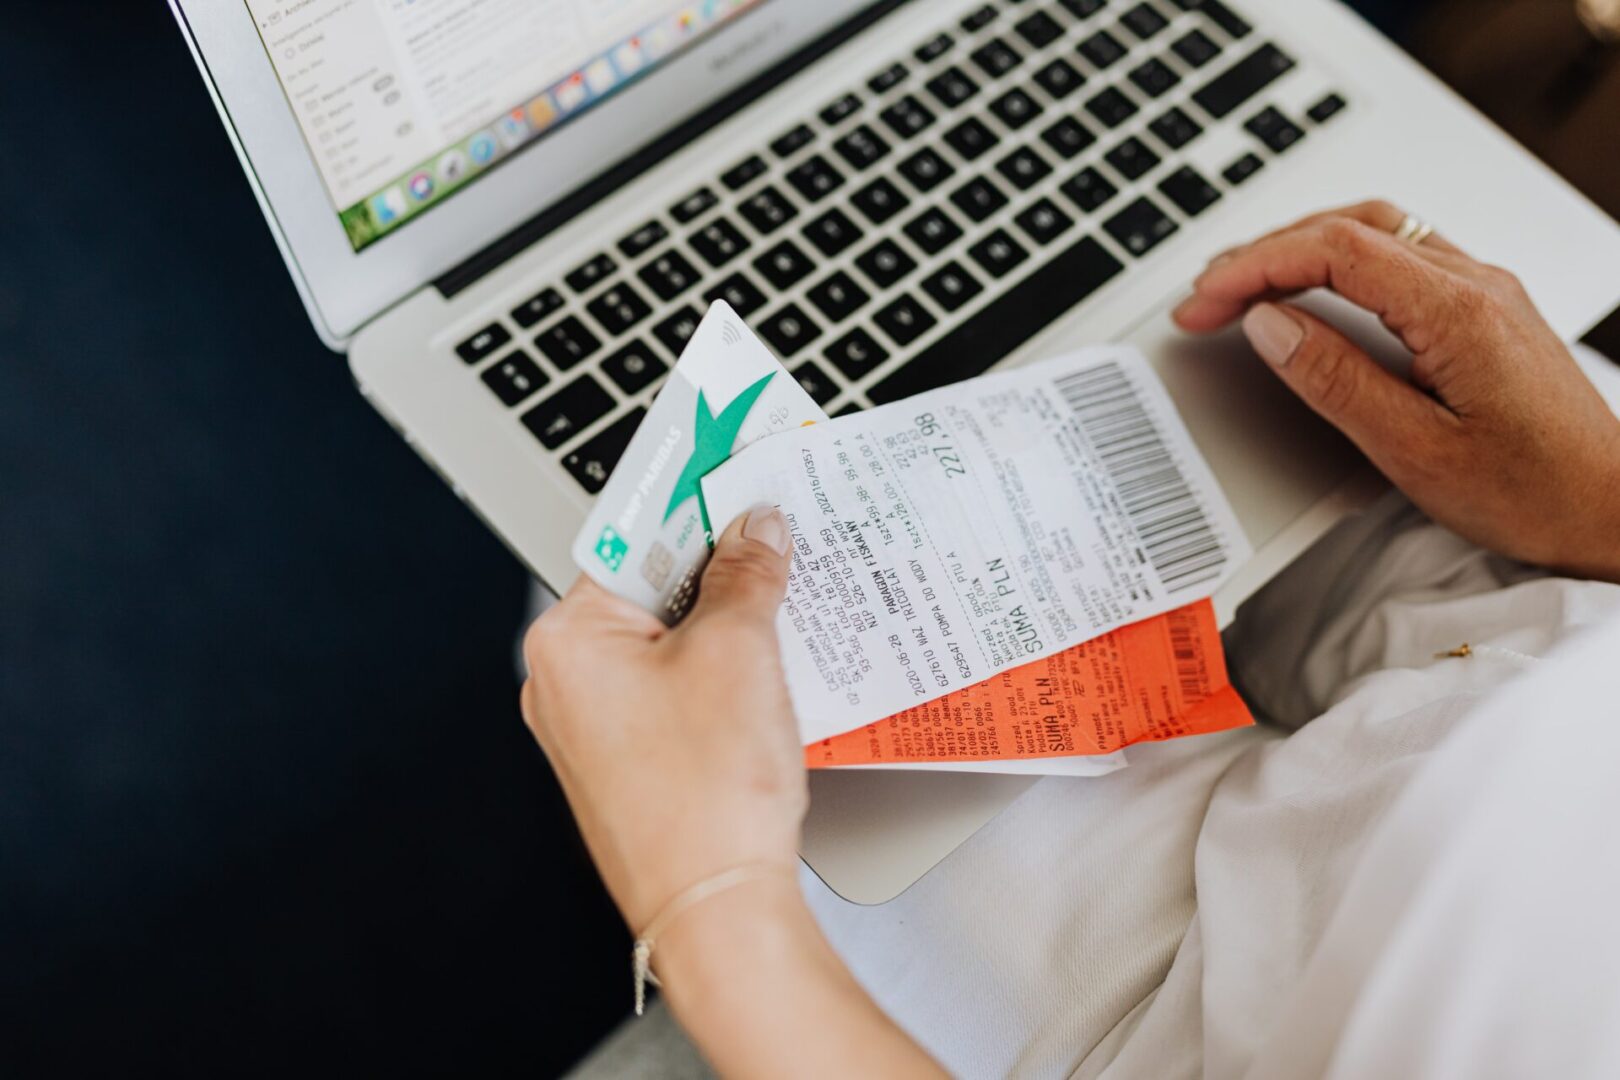 A person holding an airplane ticket and using a laptop.